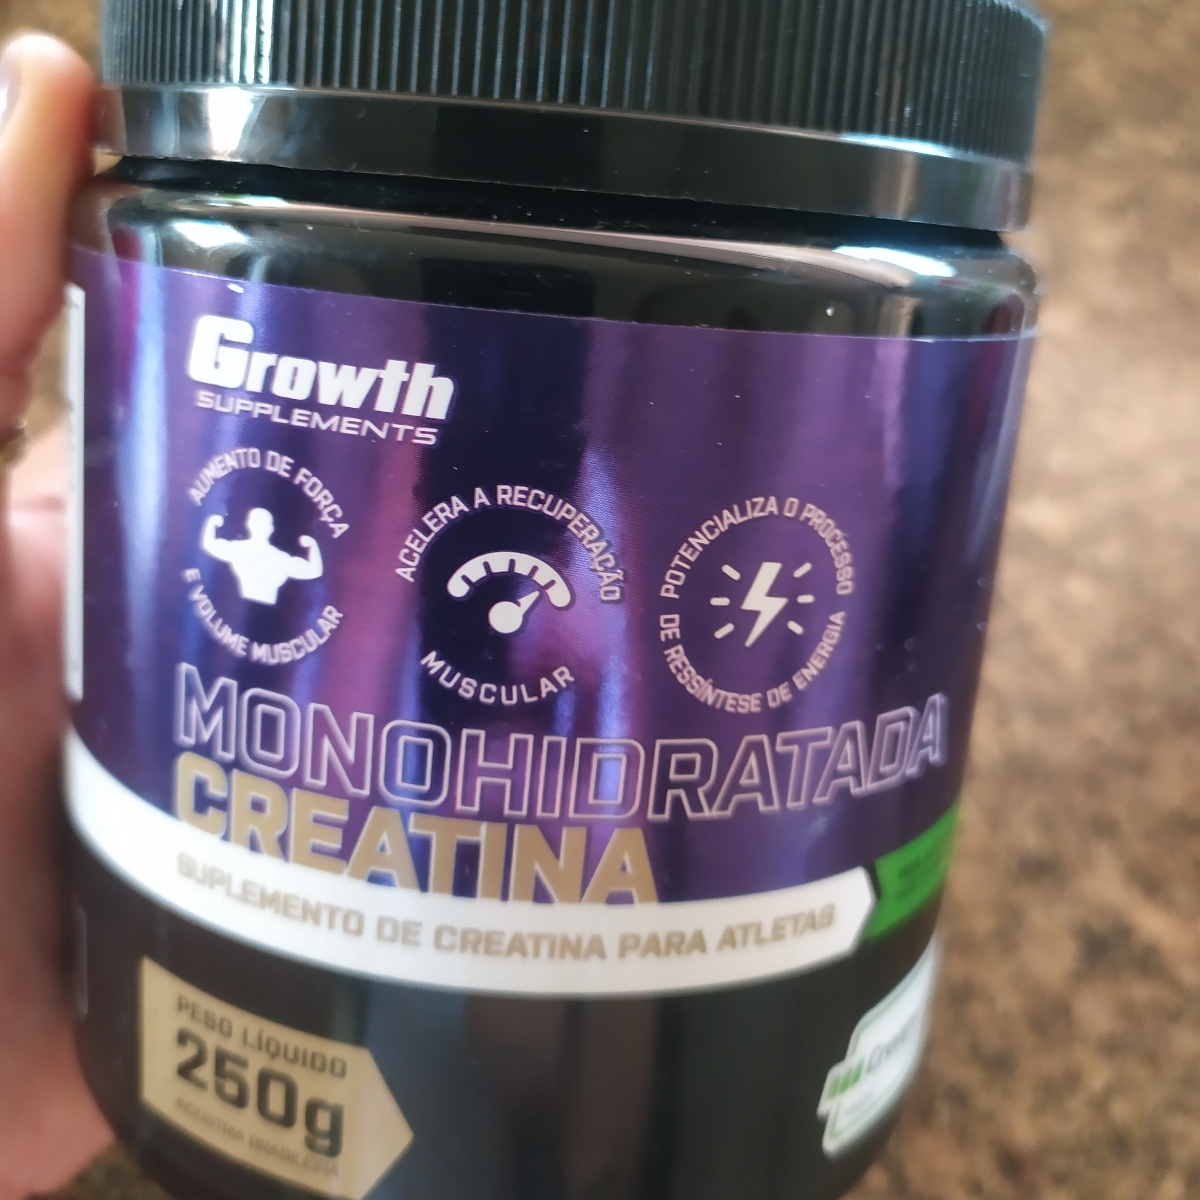 Growth Supplements Creatina Review | abillion